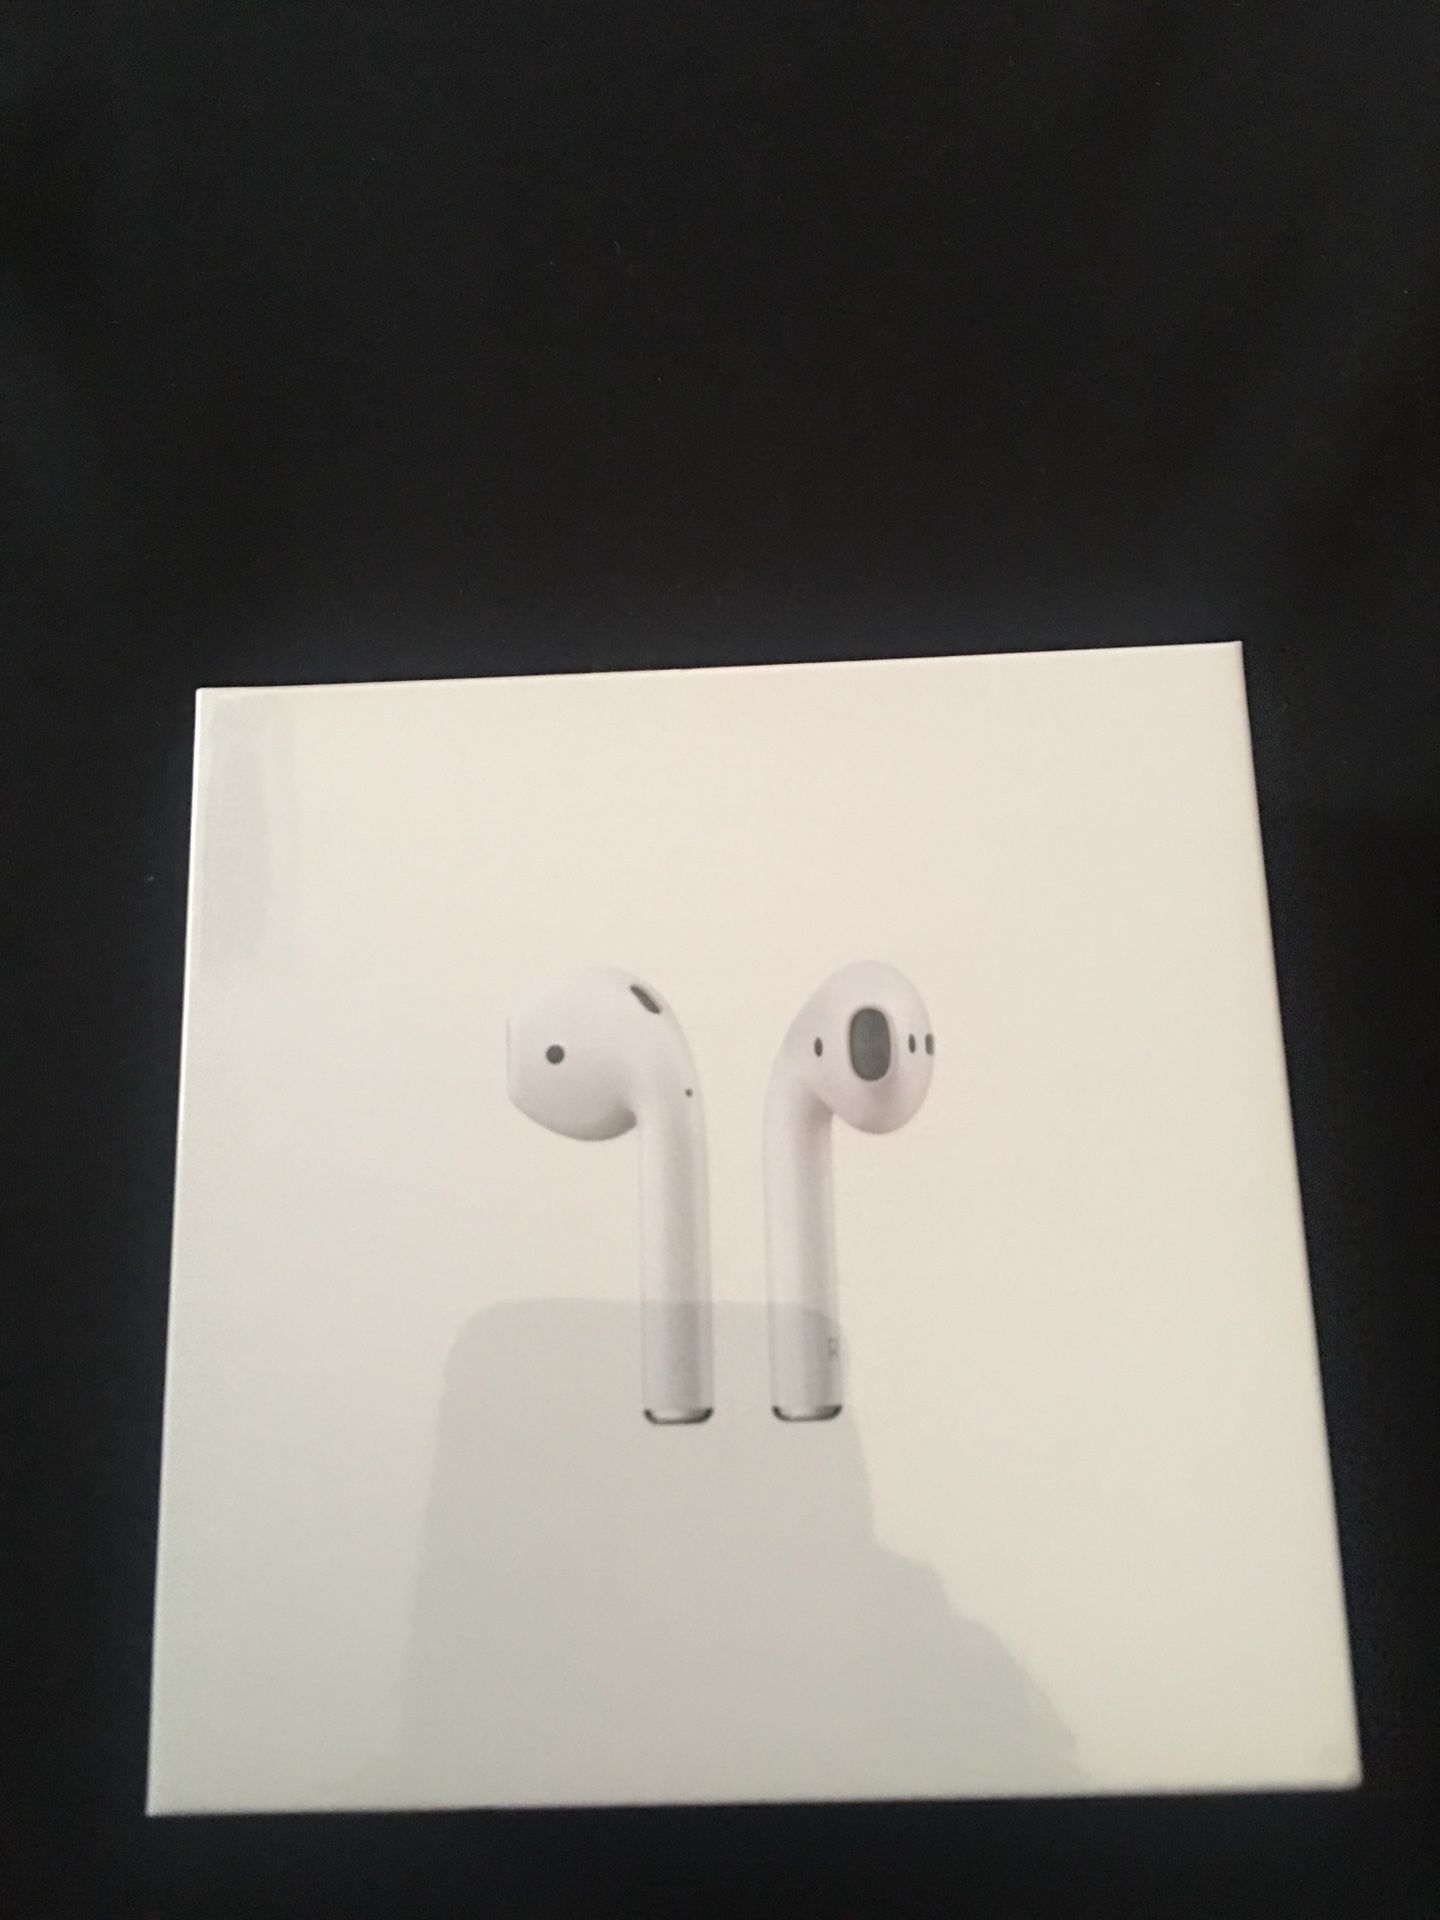 Apple AirPods!!